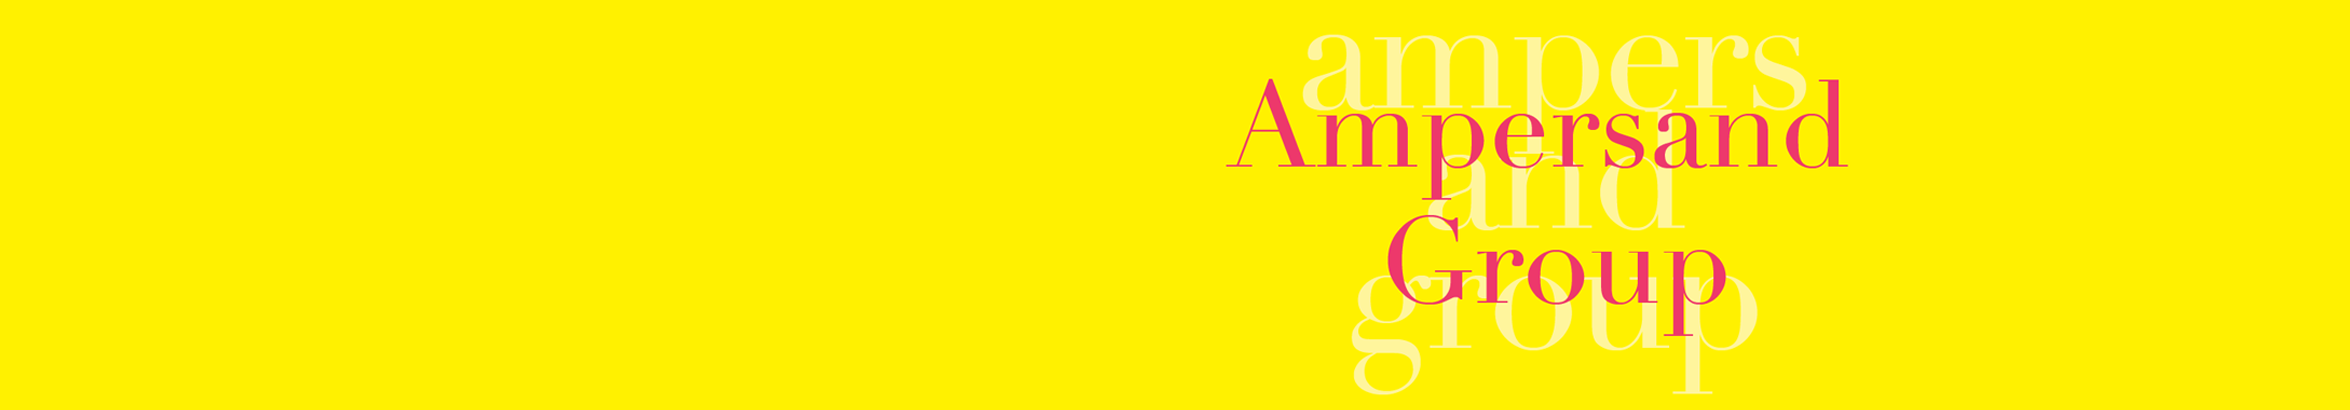 Ampersand Group's profile banner